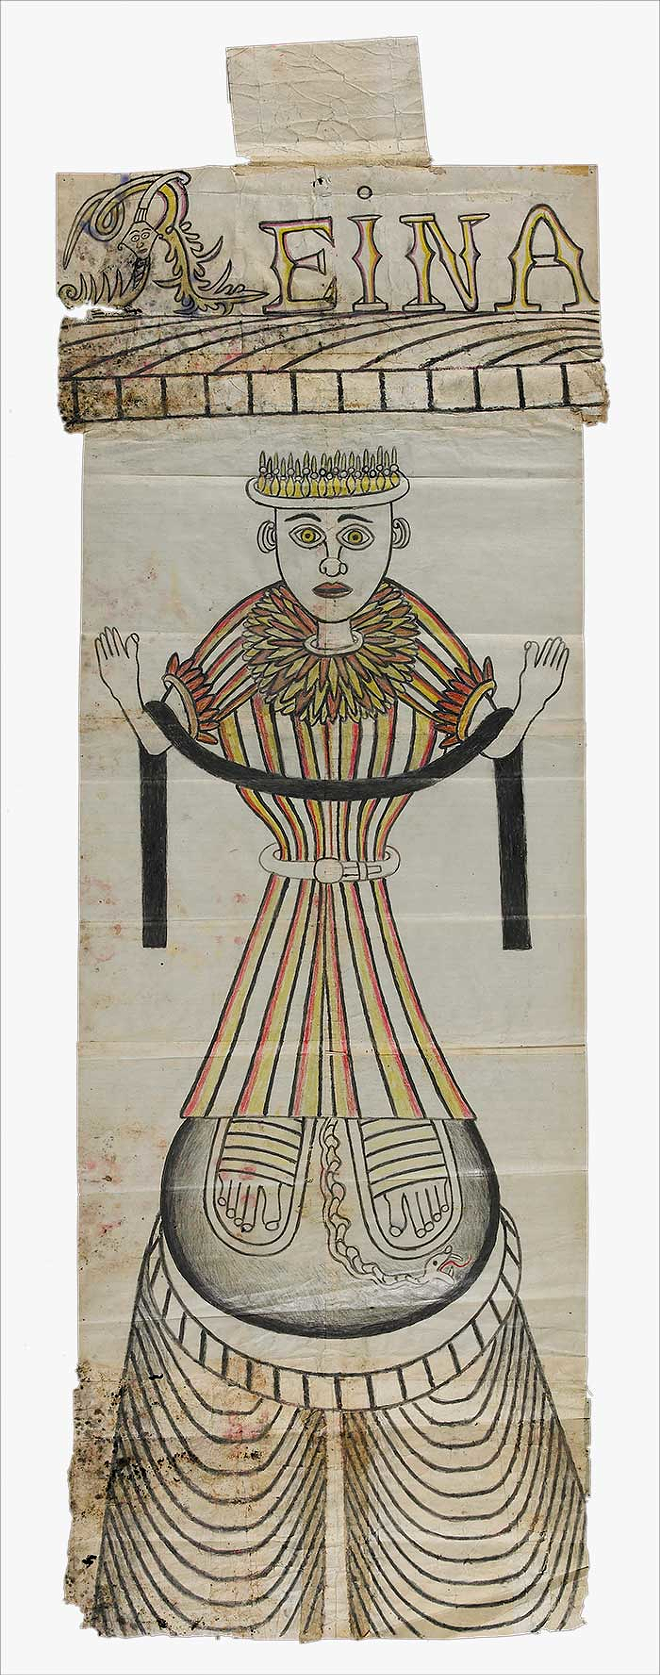 "Reina." Martín Ramírez, c. 1960–1963. Paint, crayon, pencil, and collage on pieced paper. Collection American Folk Art Museum, New York. Gift of the Family of Dr. Max Dunievitz and the Estate of Martín Ramírez. - © Estate of Martín Ramírez